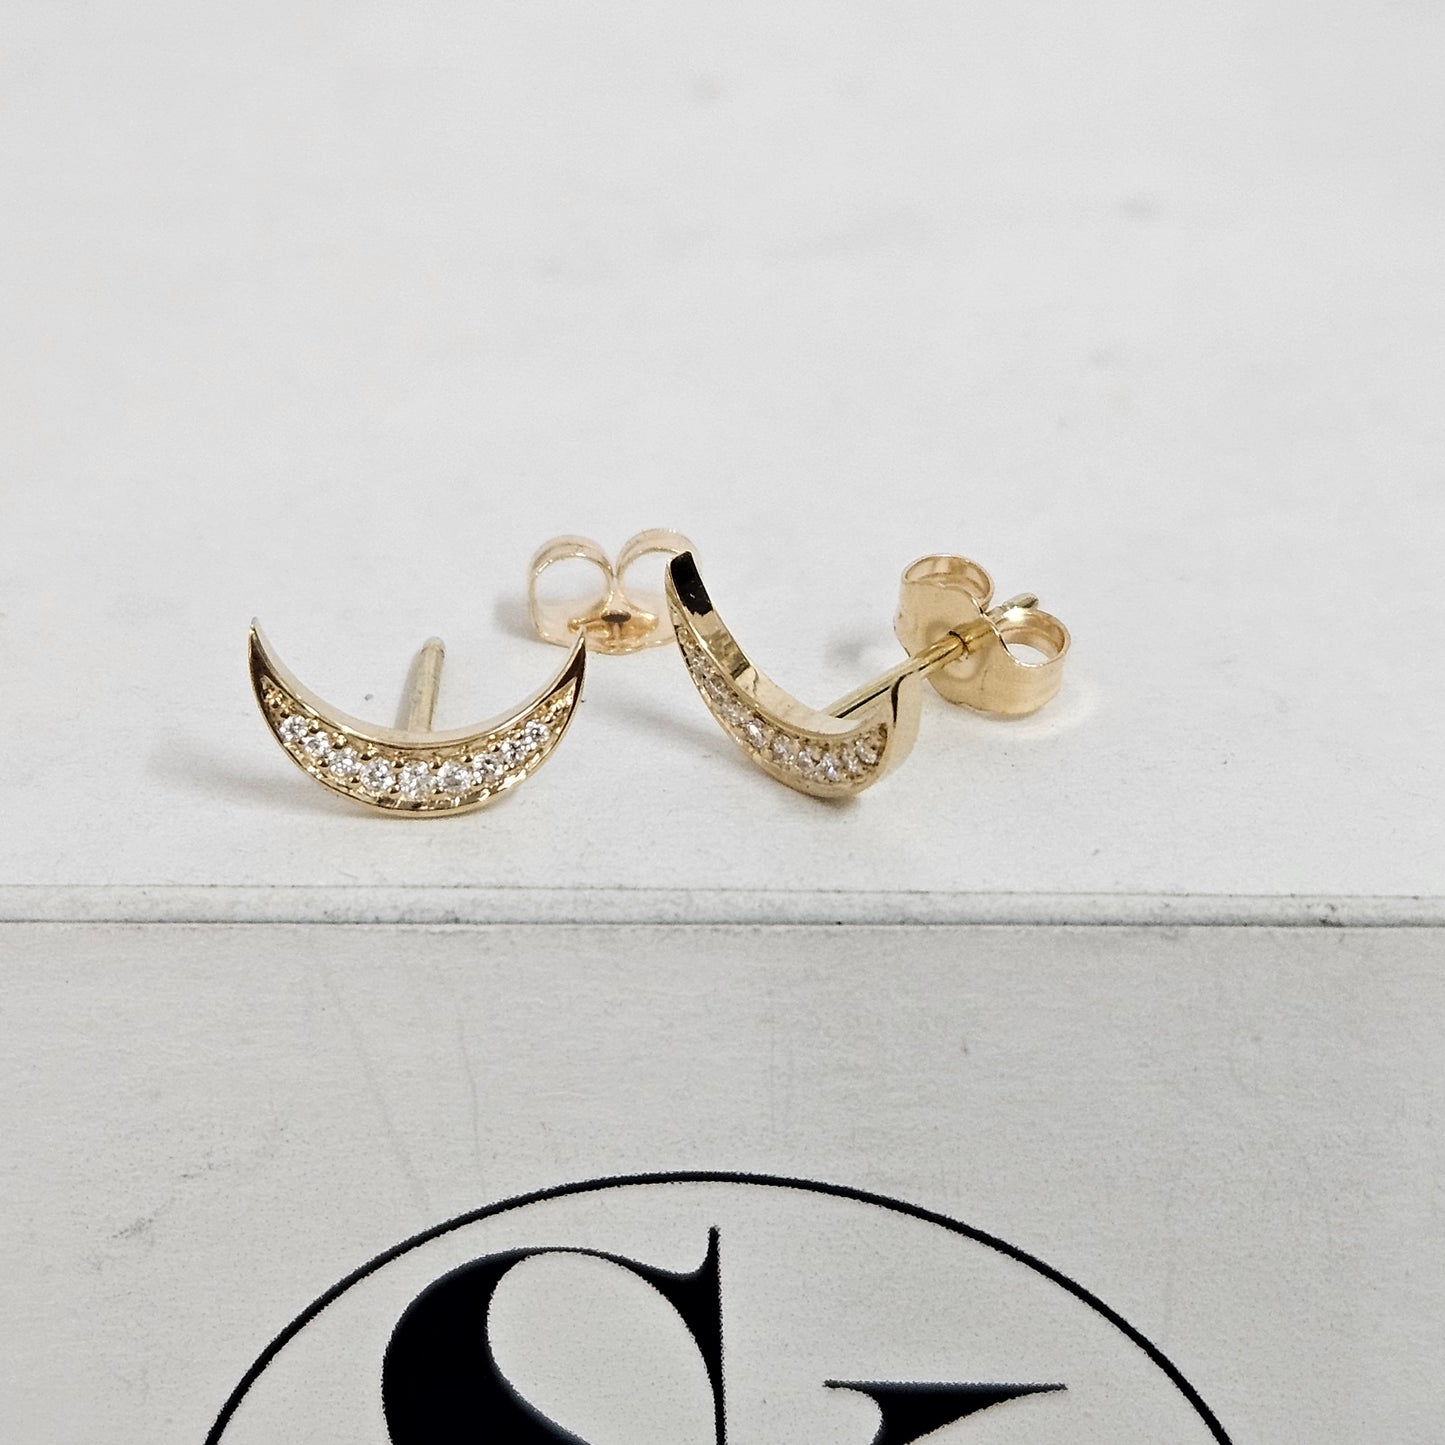 14k Diamond Crescent Moon Earring/14k Half Moon Earring/Real Diamond Small Crescent Stud/14K 18K Gold Earring/Single or Pair/Gifts for Her